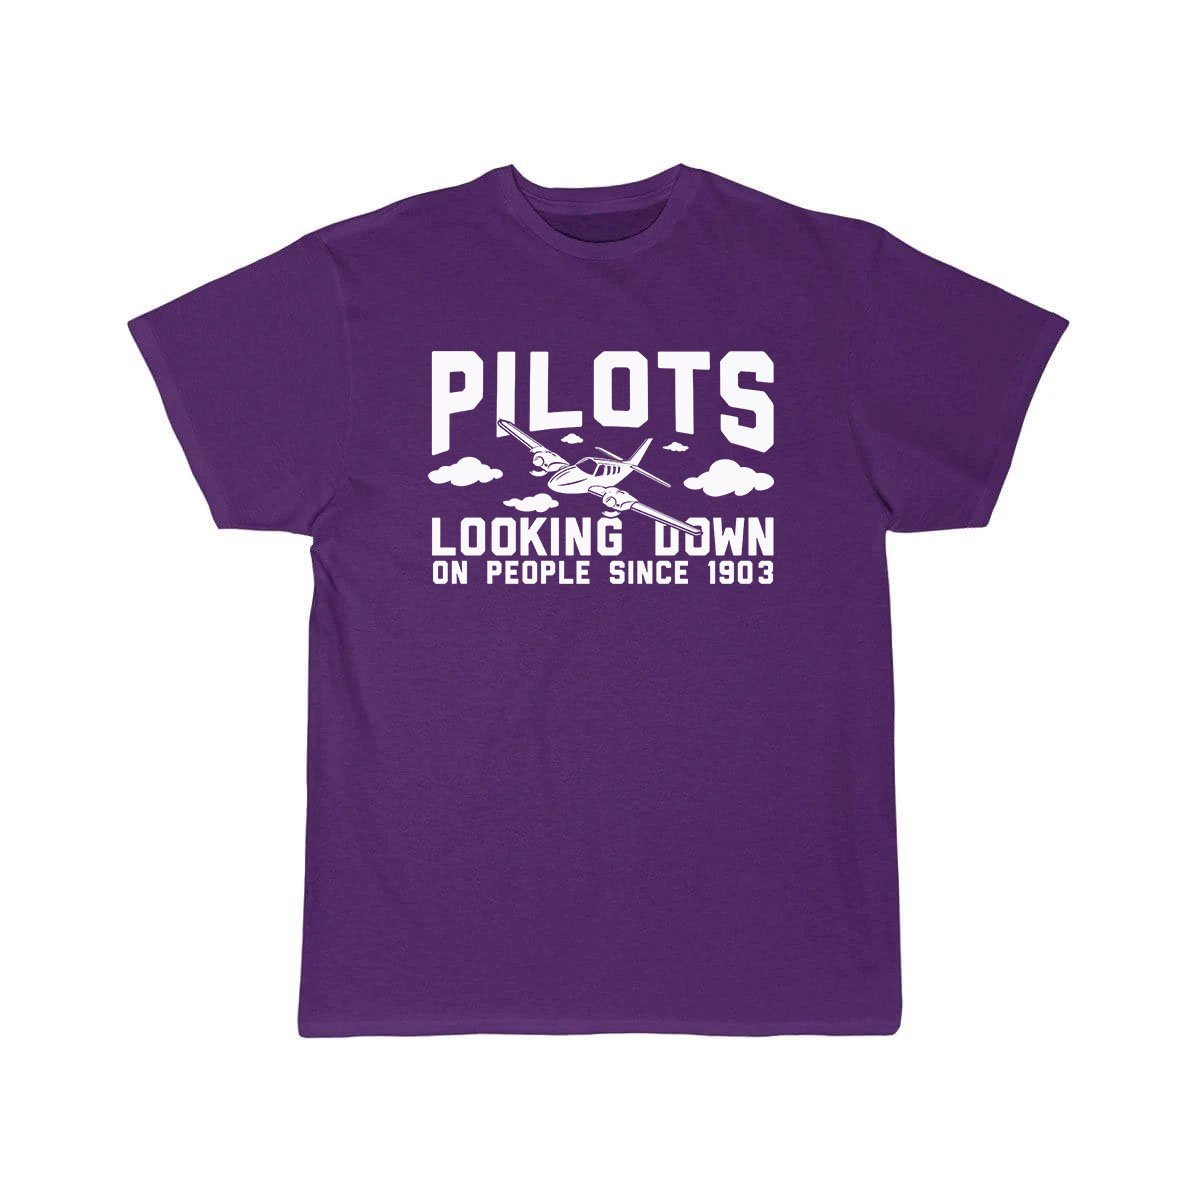 PILOTS LOOKING DOWN ON PEOPLE SINCE 1903 ESSENTIAL T-SHIRT THE AV8R